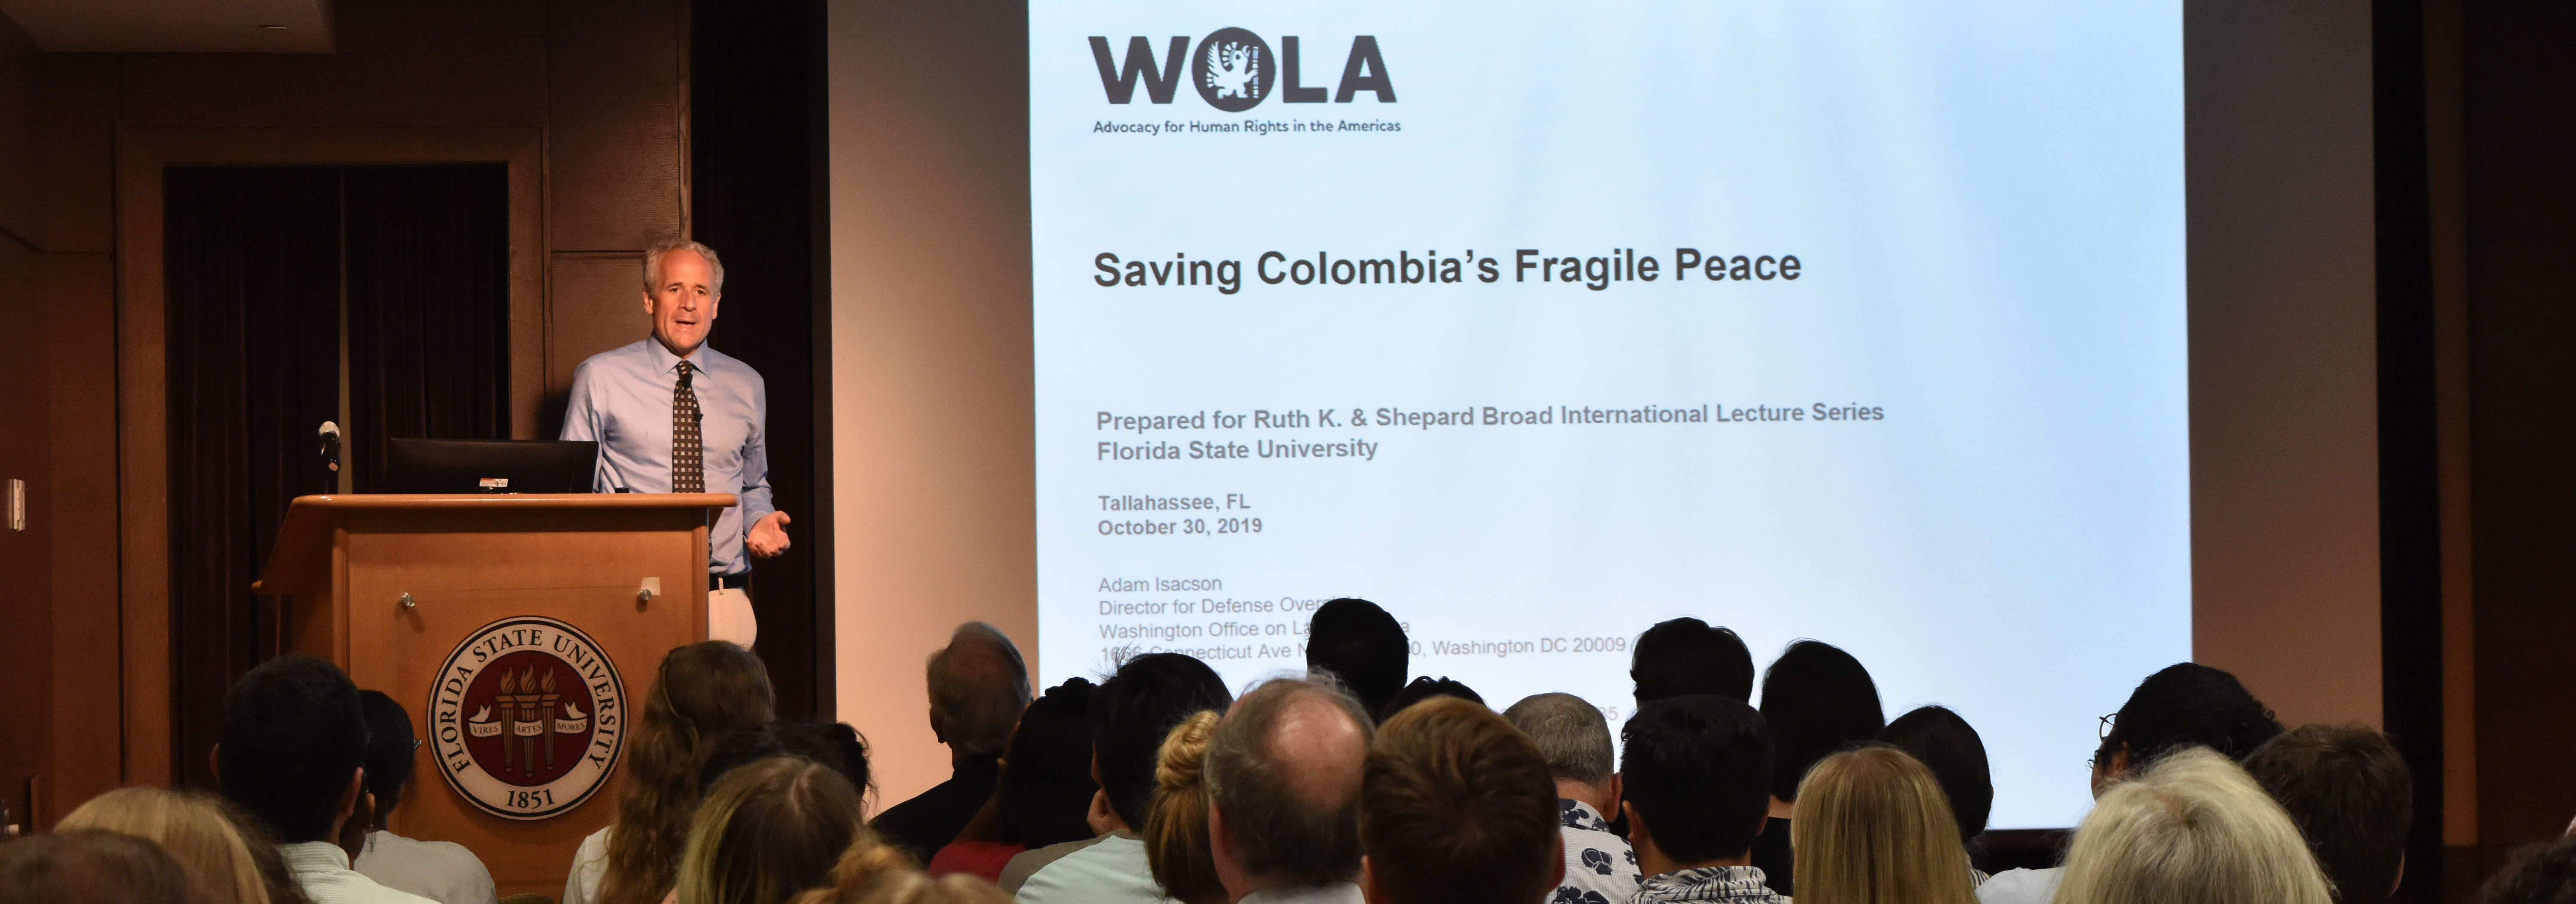 Engage Your World – Saving Colombia's Fragile Peace